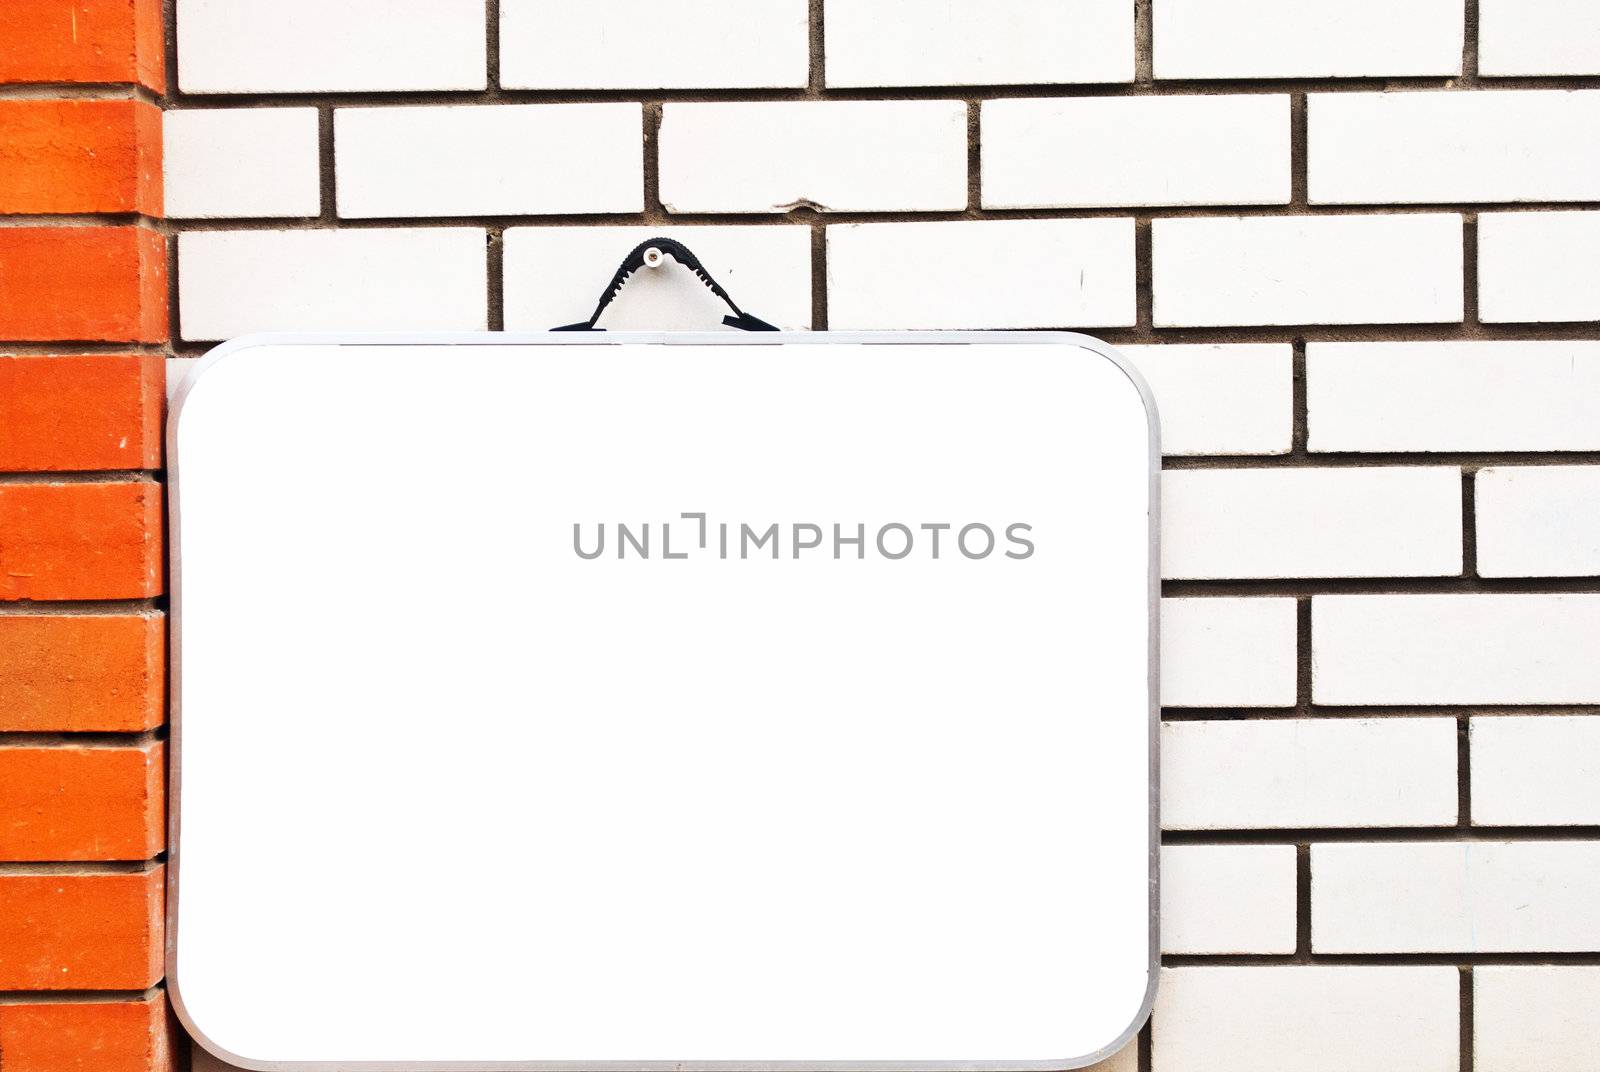 Large billboard with blank white paper ready for text.